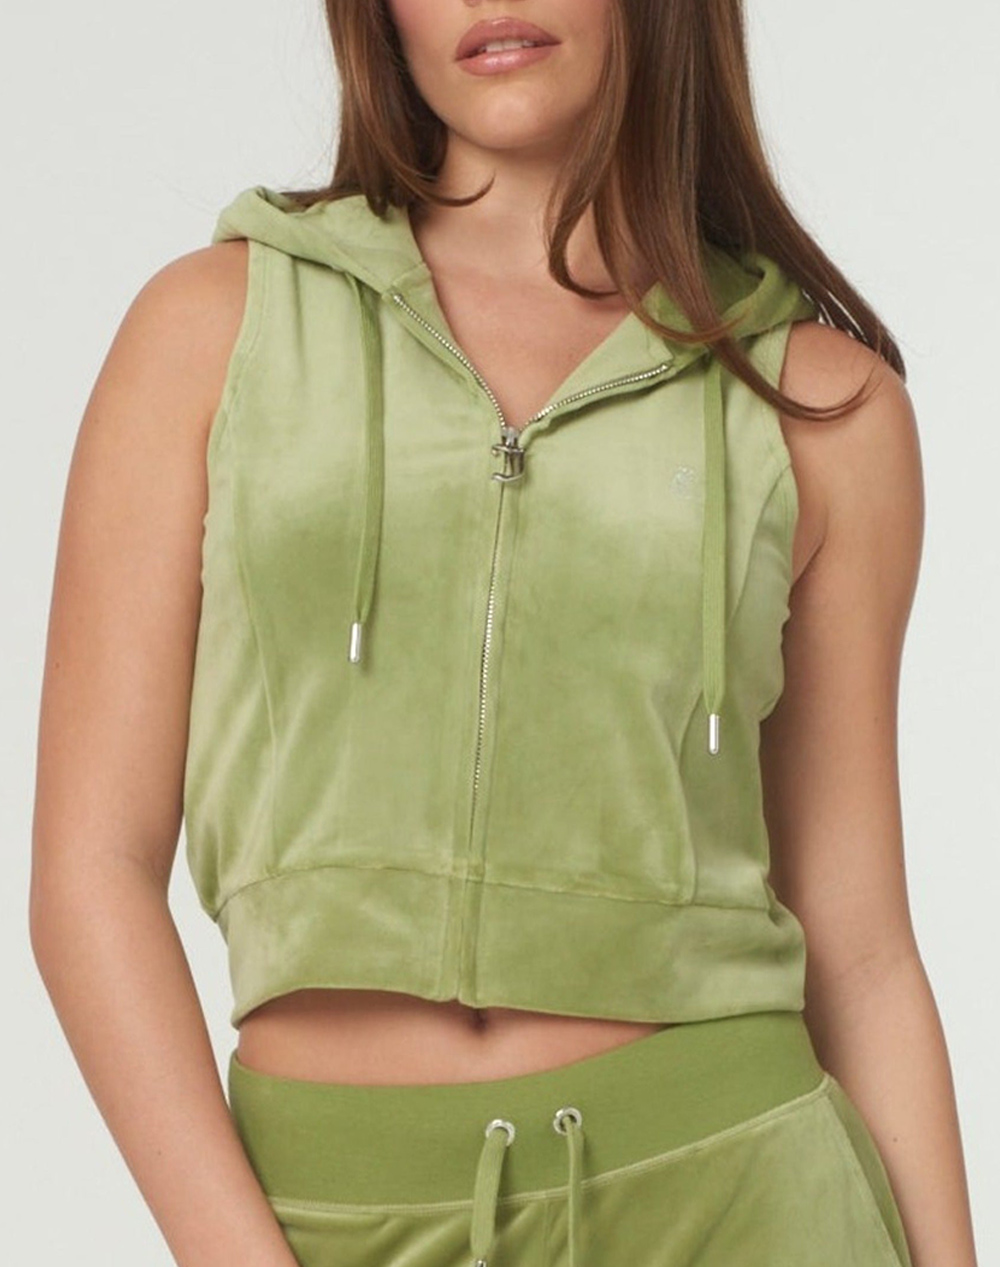 JUICY COUTURE GILLY VELOUR GILET JCWGL23308-336 Olive